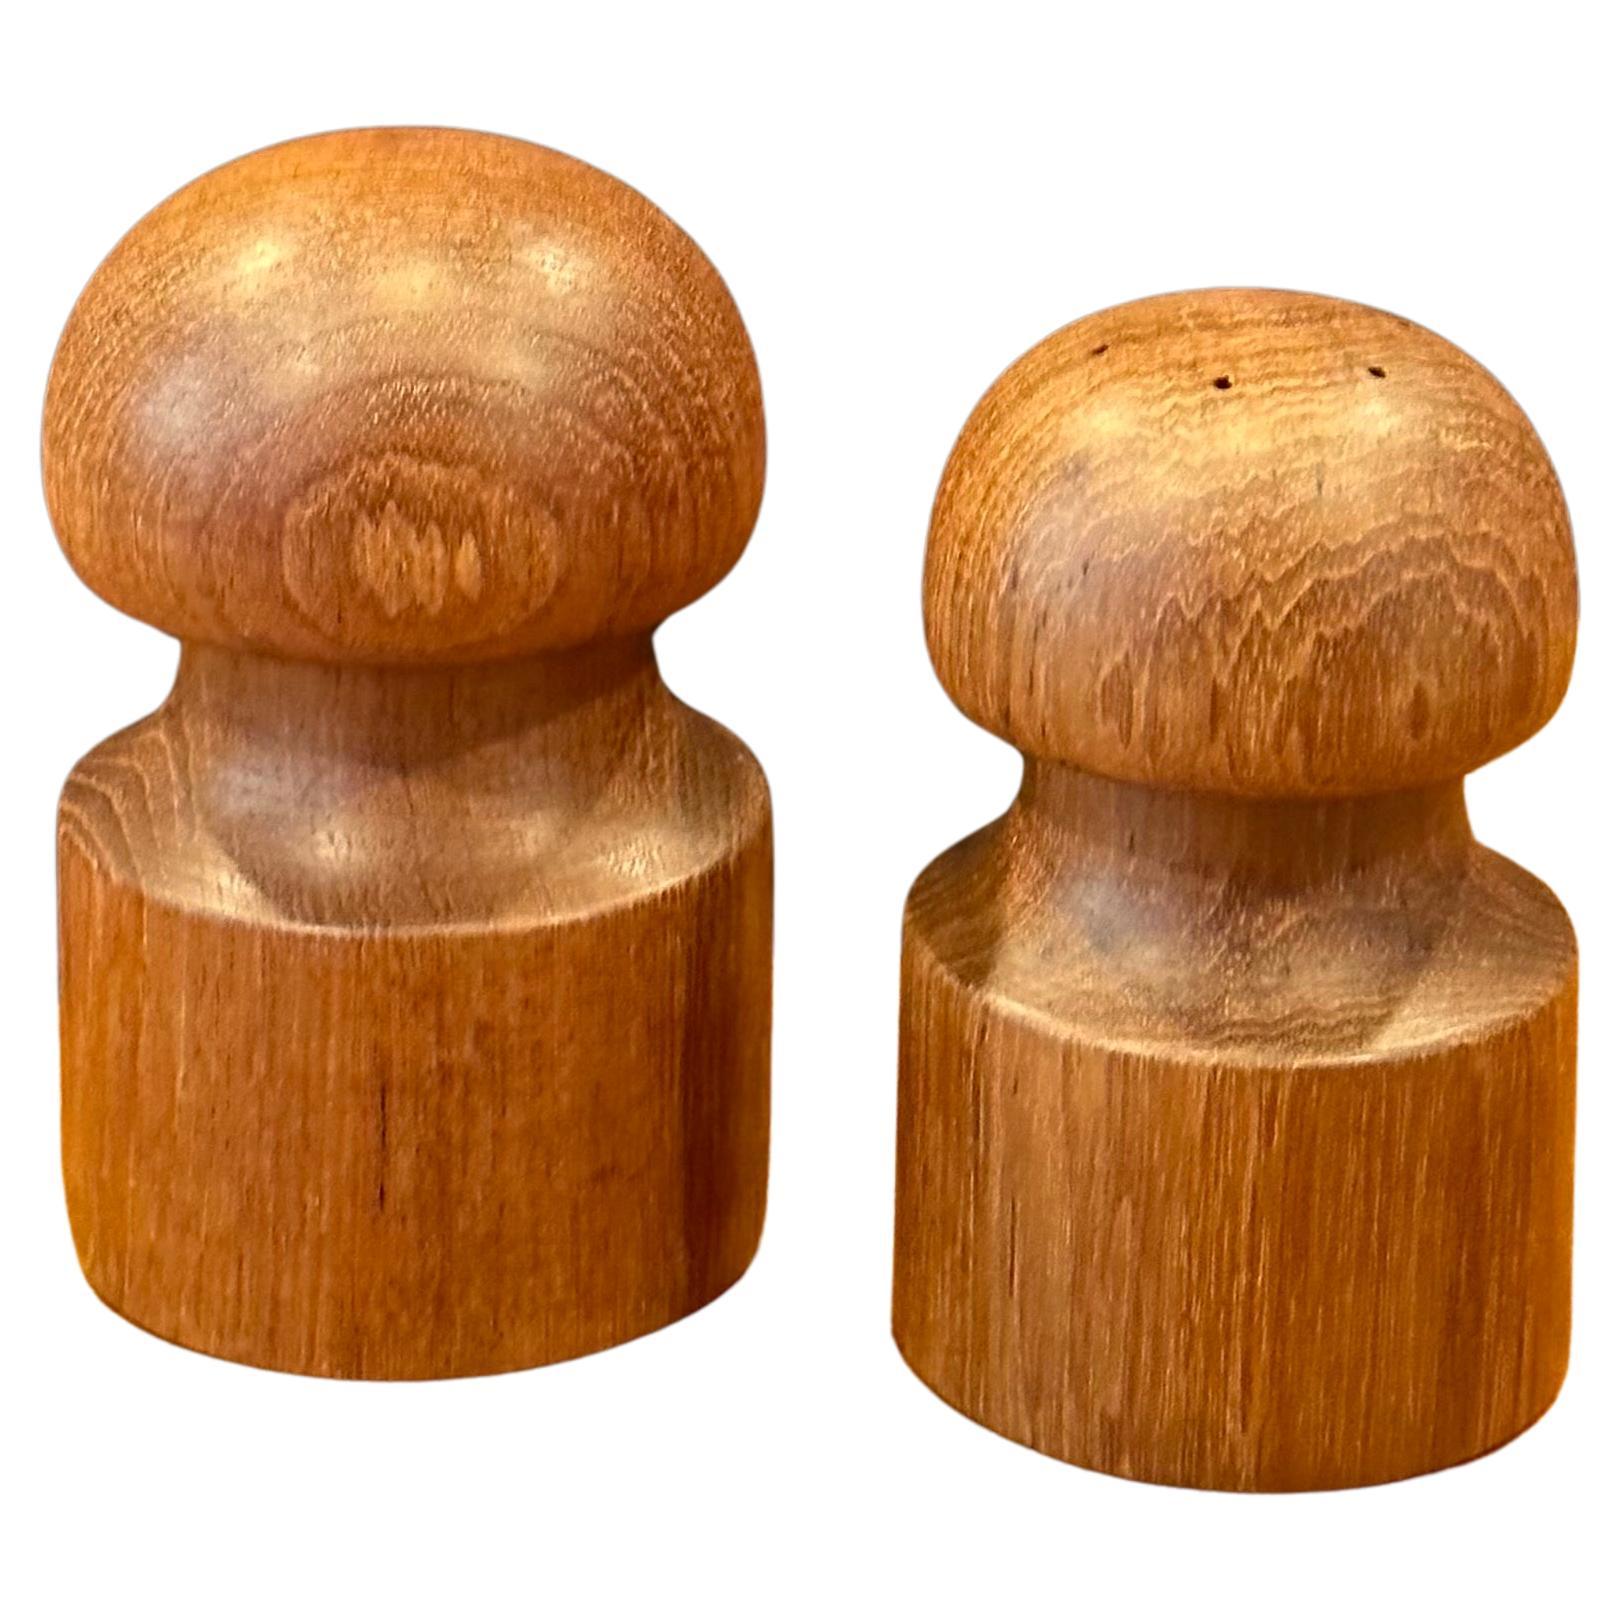 Pair of MCM teak salt and pepper shakers with original box by Jens Quistgaard for Dansk, circa 1970s.  The set are in very good vintage condition and measure as follows:   

Box        8